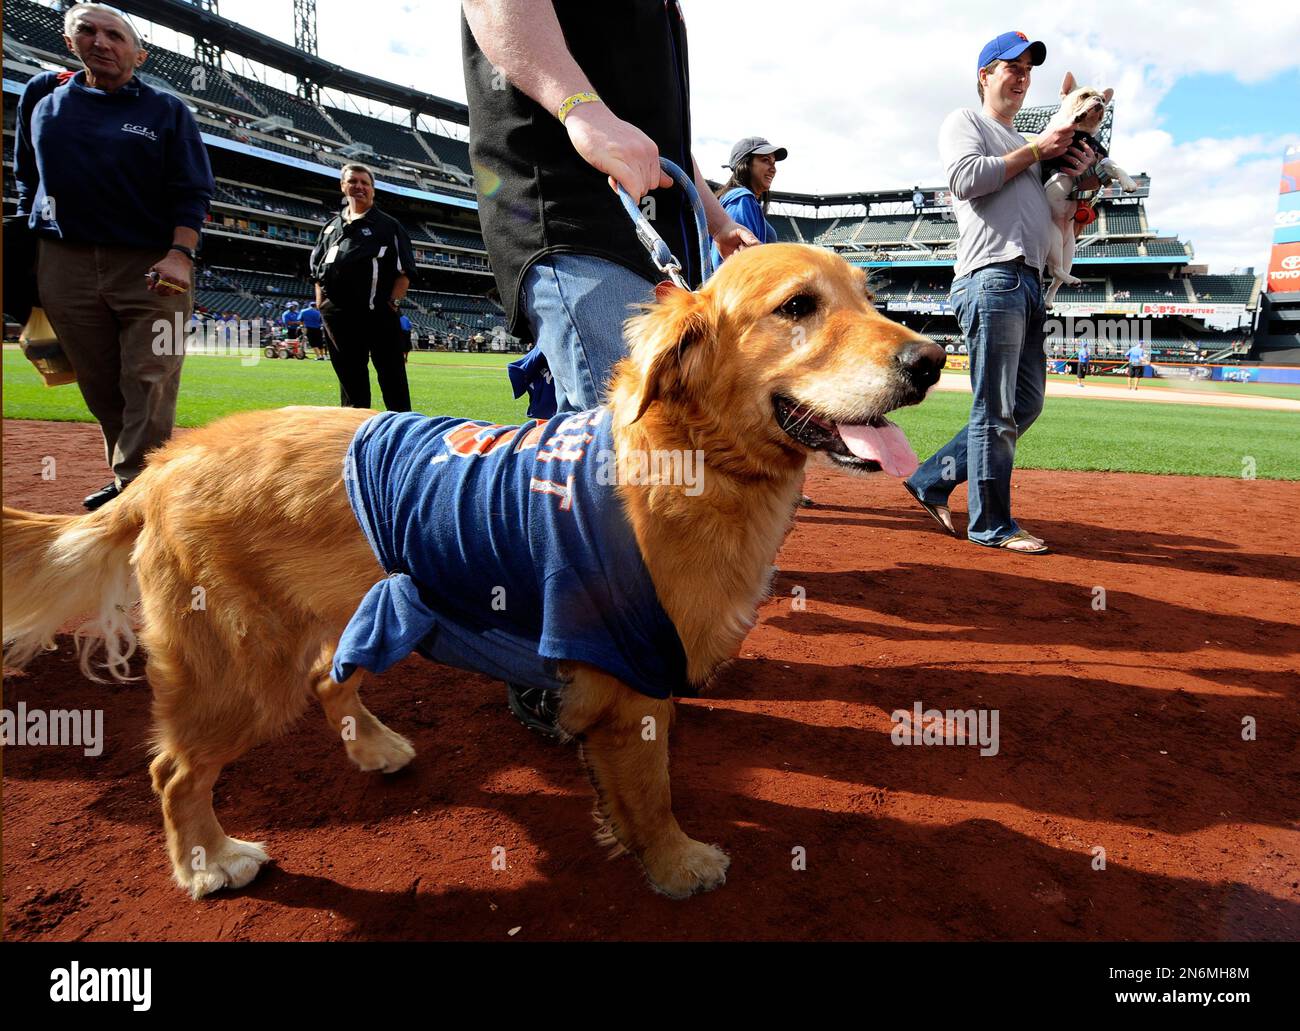 A dog walks around the field during Bark in the Park day at Citi Field  before Game 1 of a doubleheader baseball game between the New York Mets and  the Miami Marlins